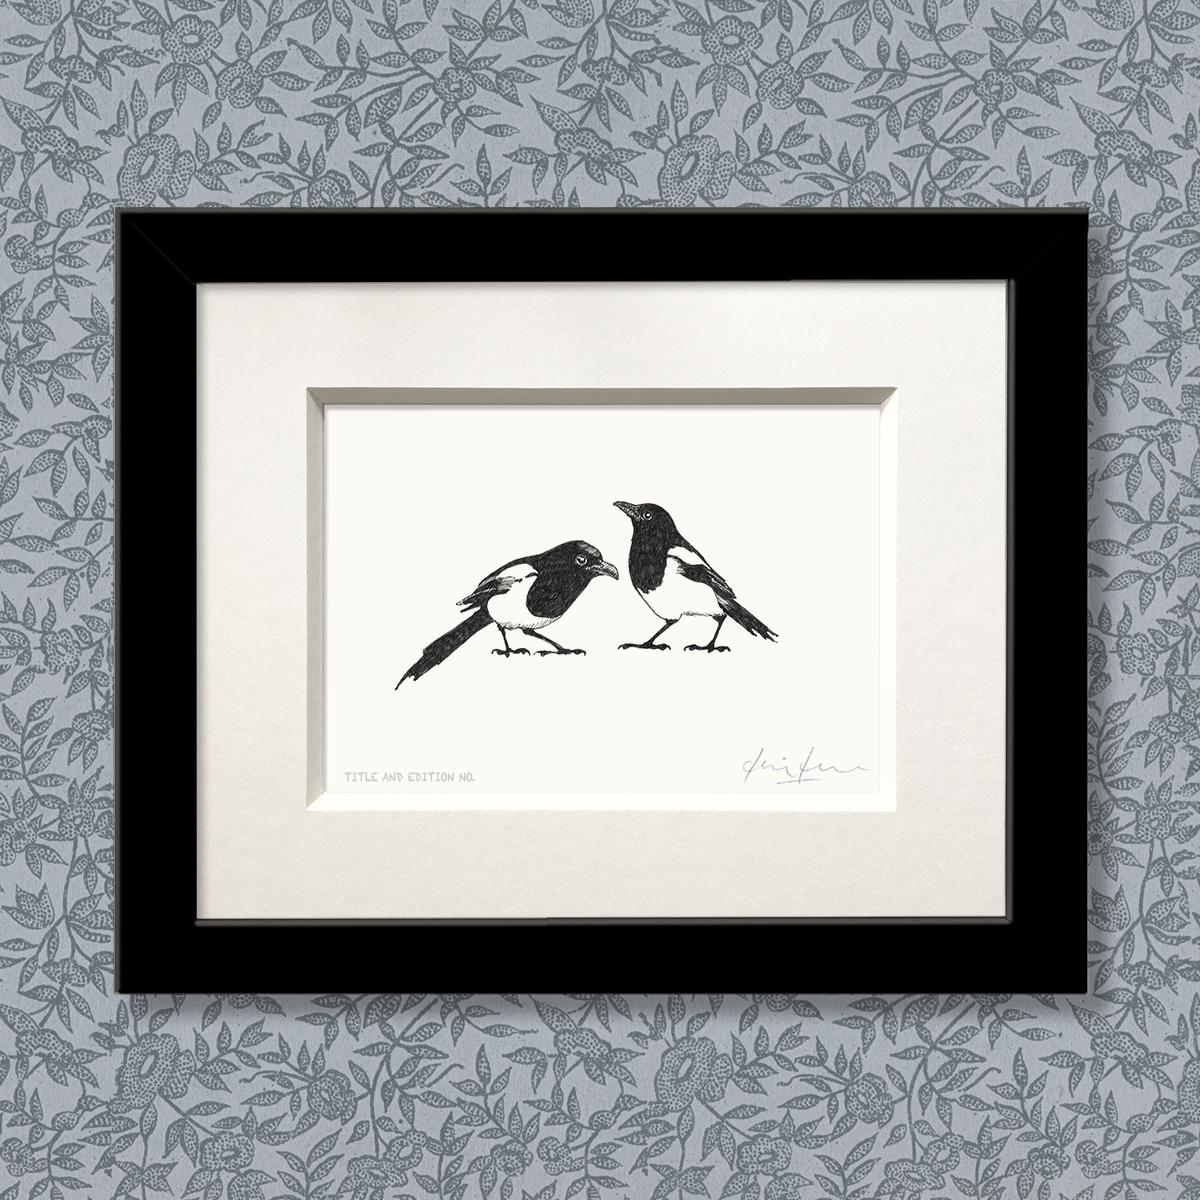 Limited edition print from pen and ink drawing of two magpies in black frame